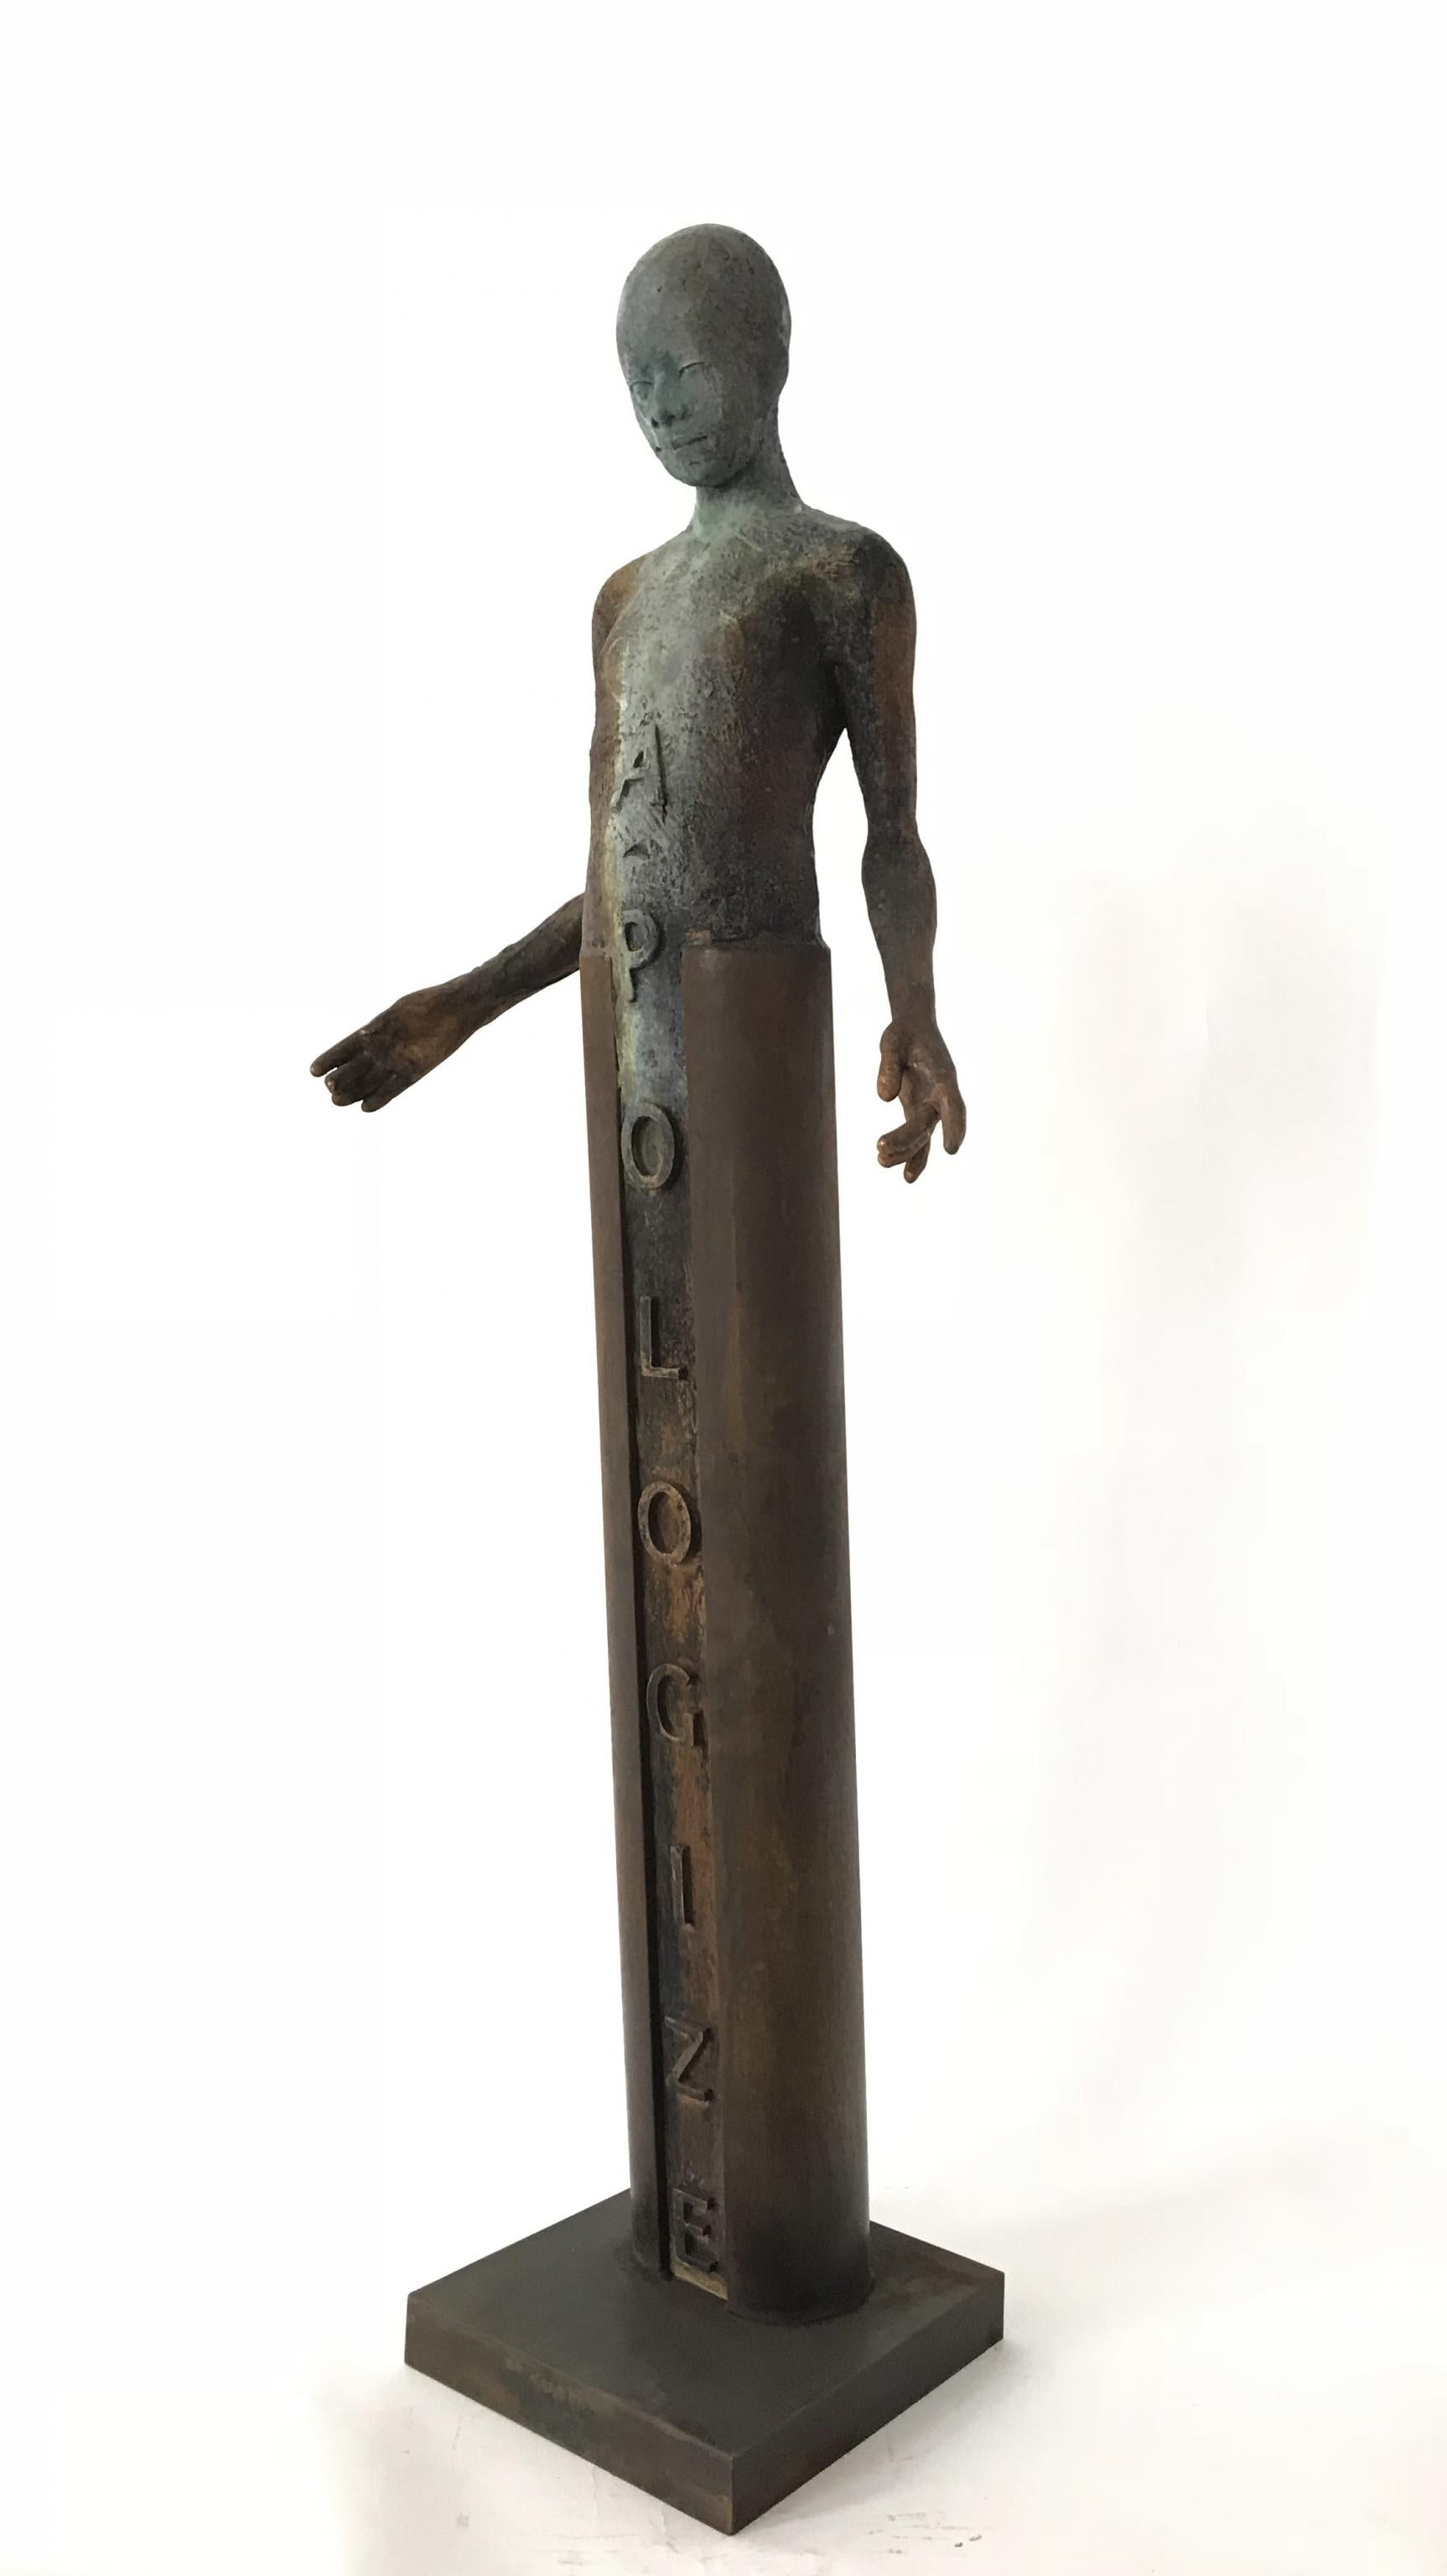 Jesus Curia Perez Abstract Sculpture - Apologize, Bronze Sculpture of a Single Figure, "Fuck You" Emblazoned on Back